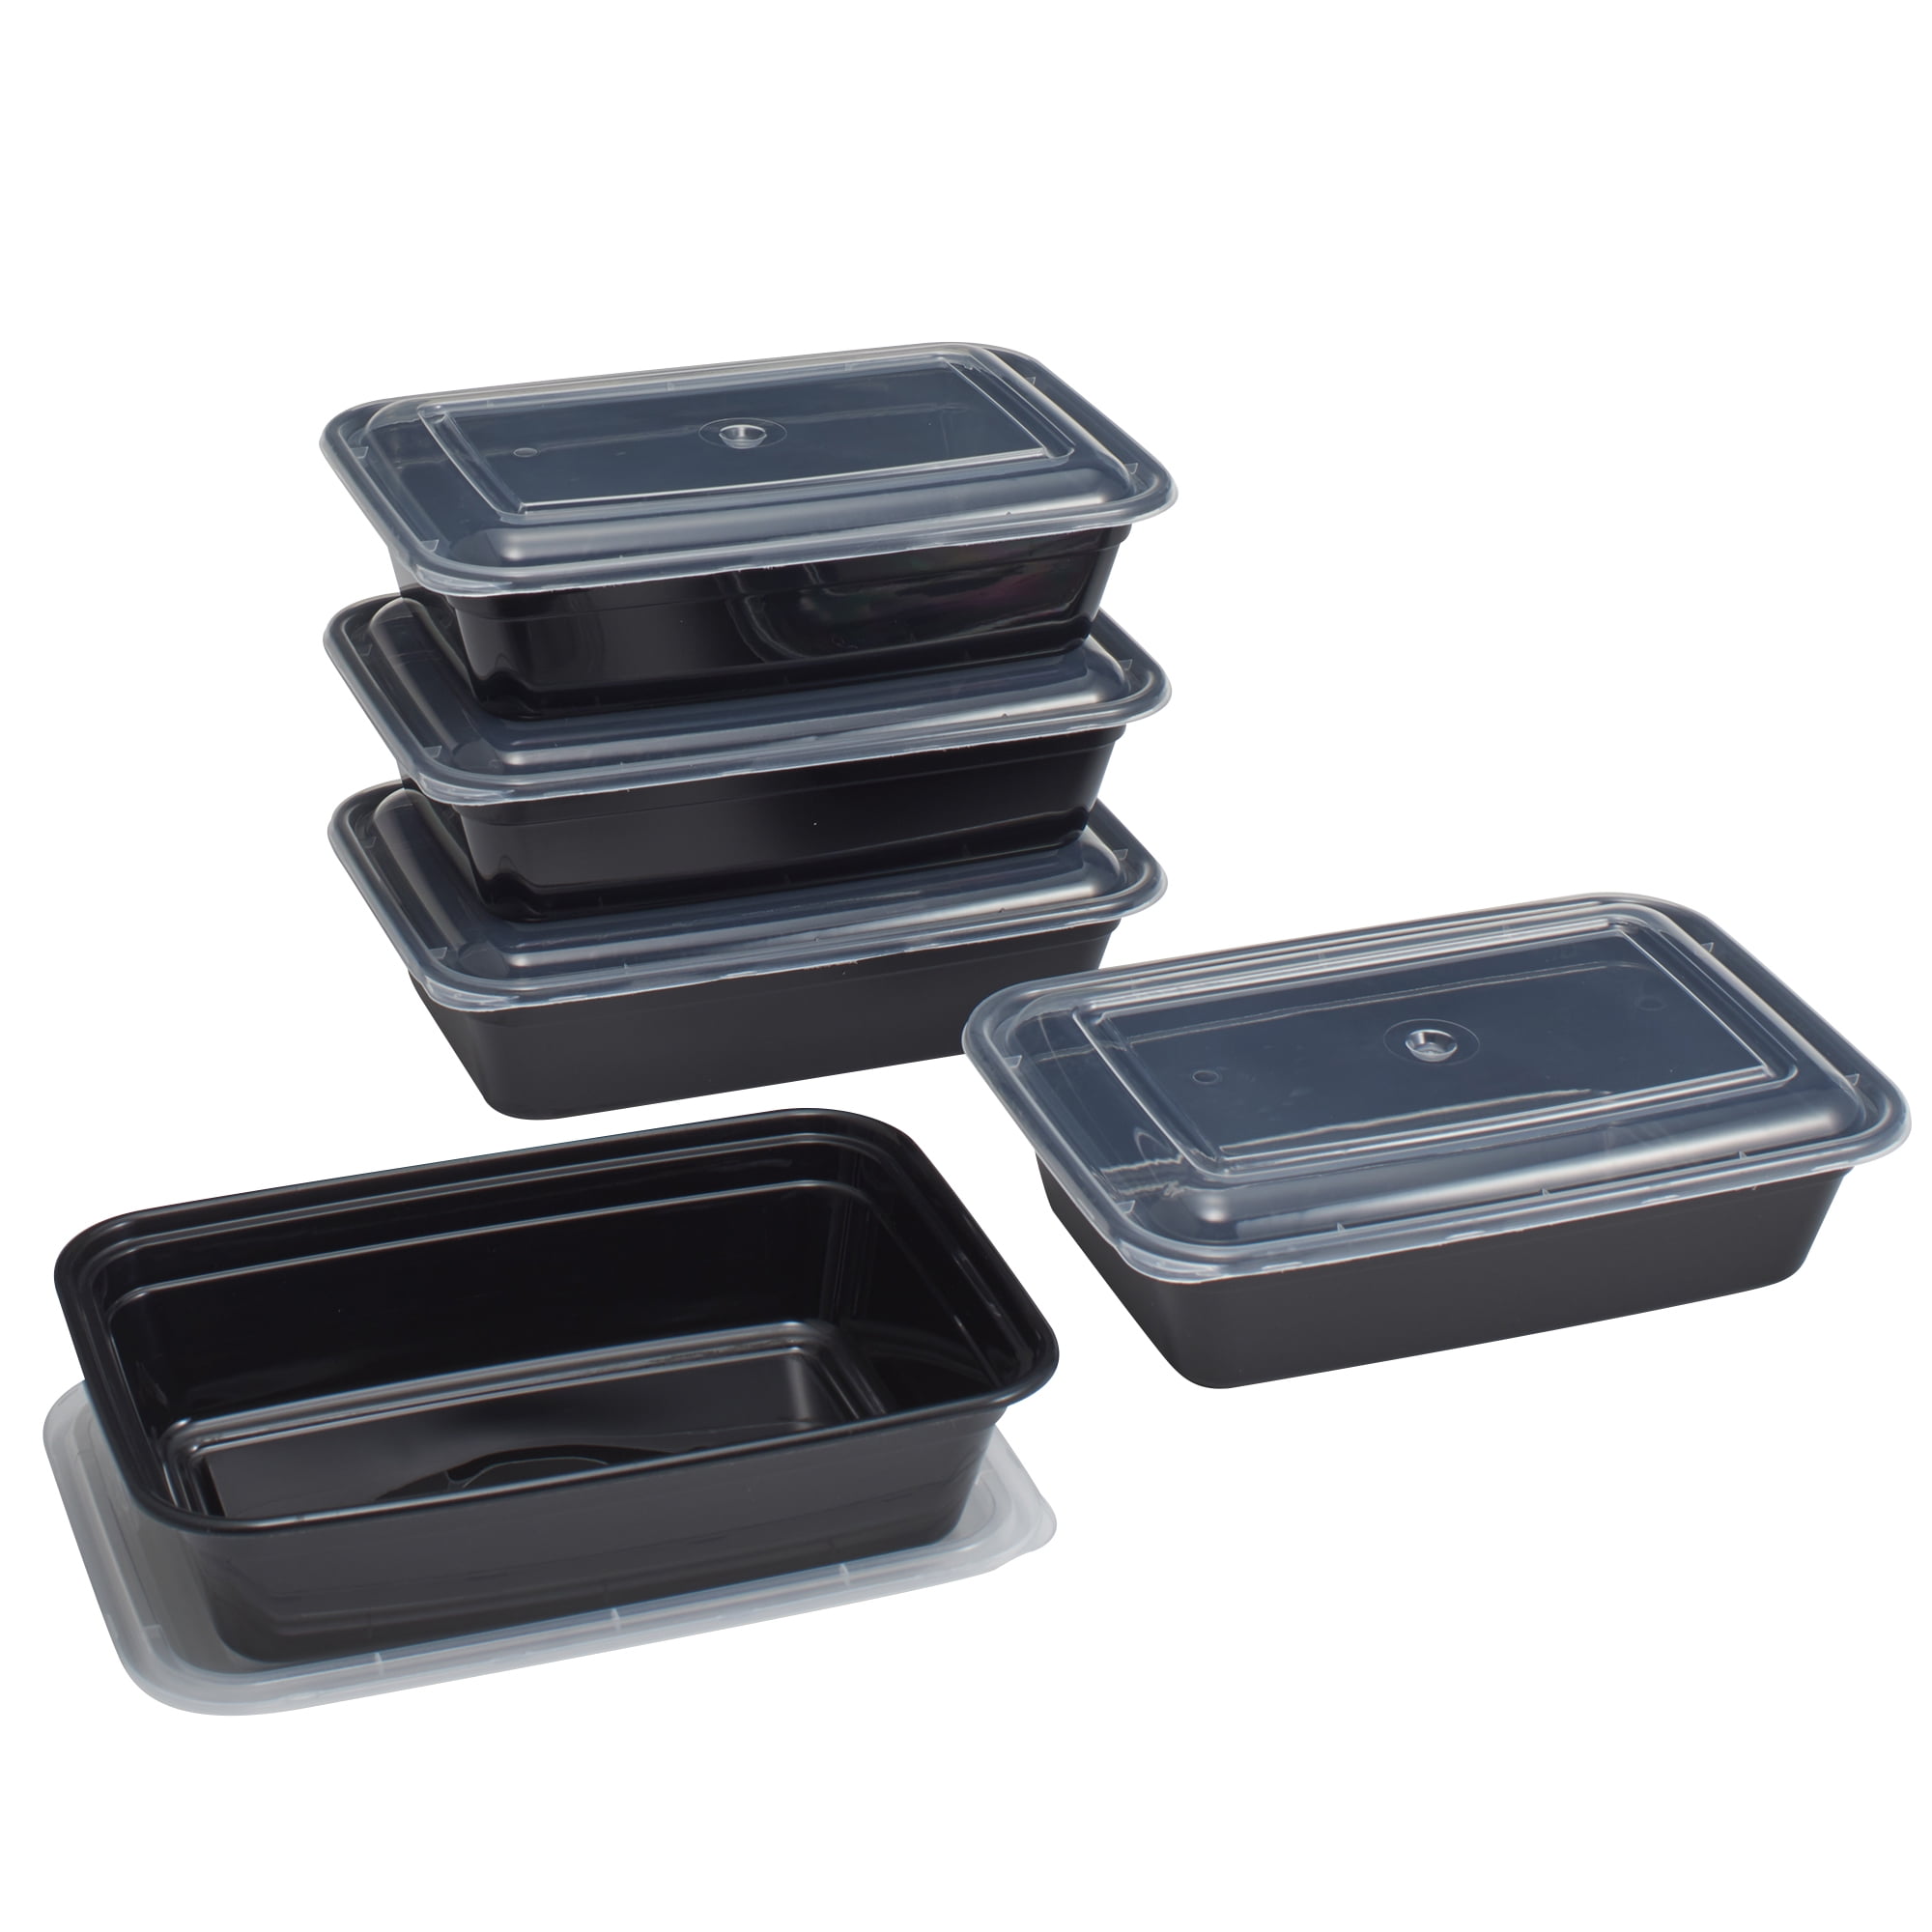 Mainstays 10 Piece Meal Prep Food Storage Containers, Black 